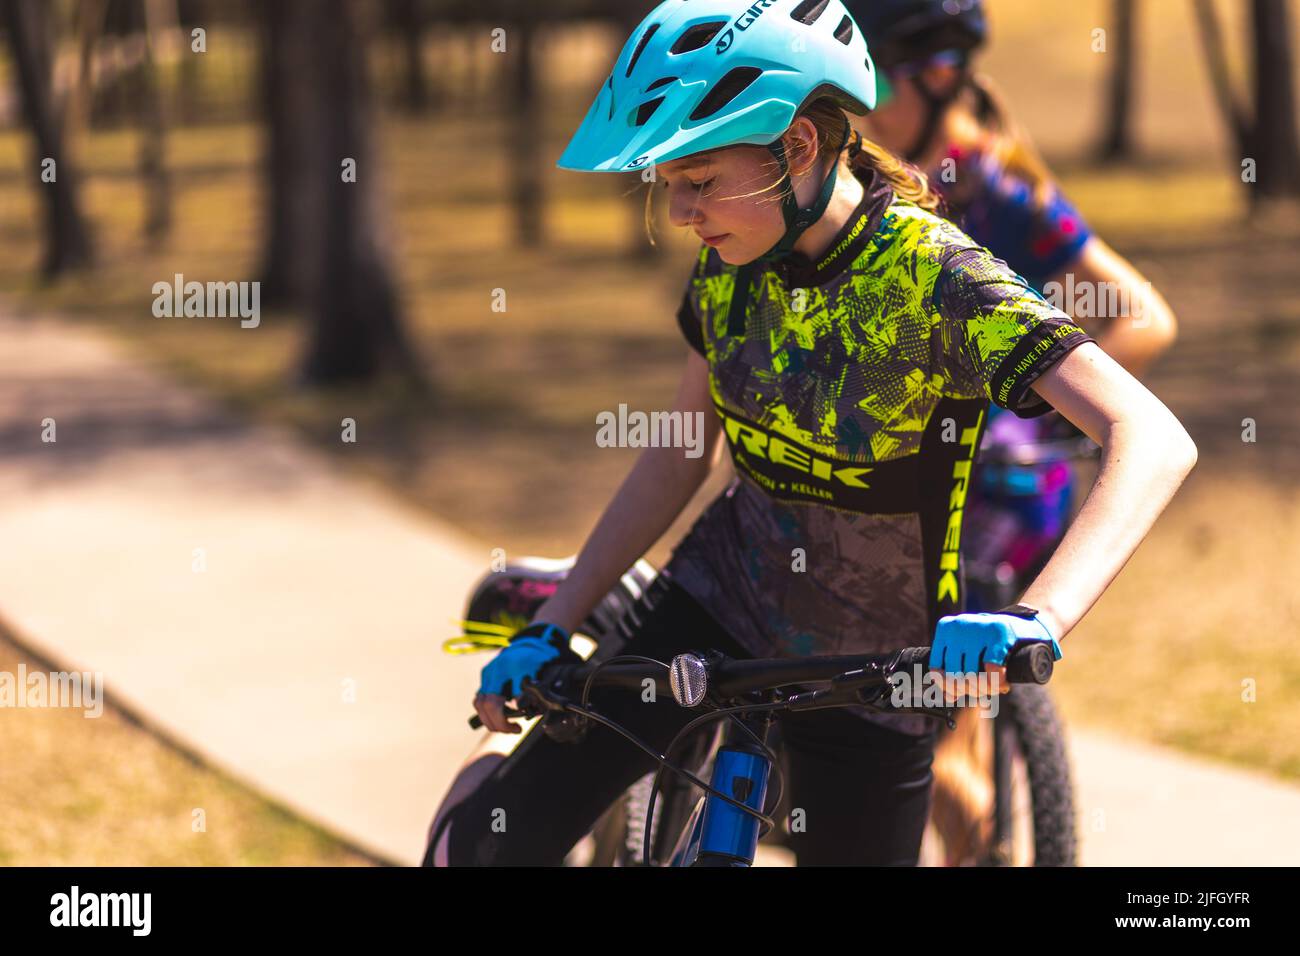 A Caucasian girl riding a bike in a race held in the DFW metroplex in Texas Stock Photo